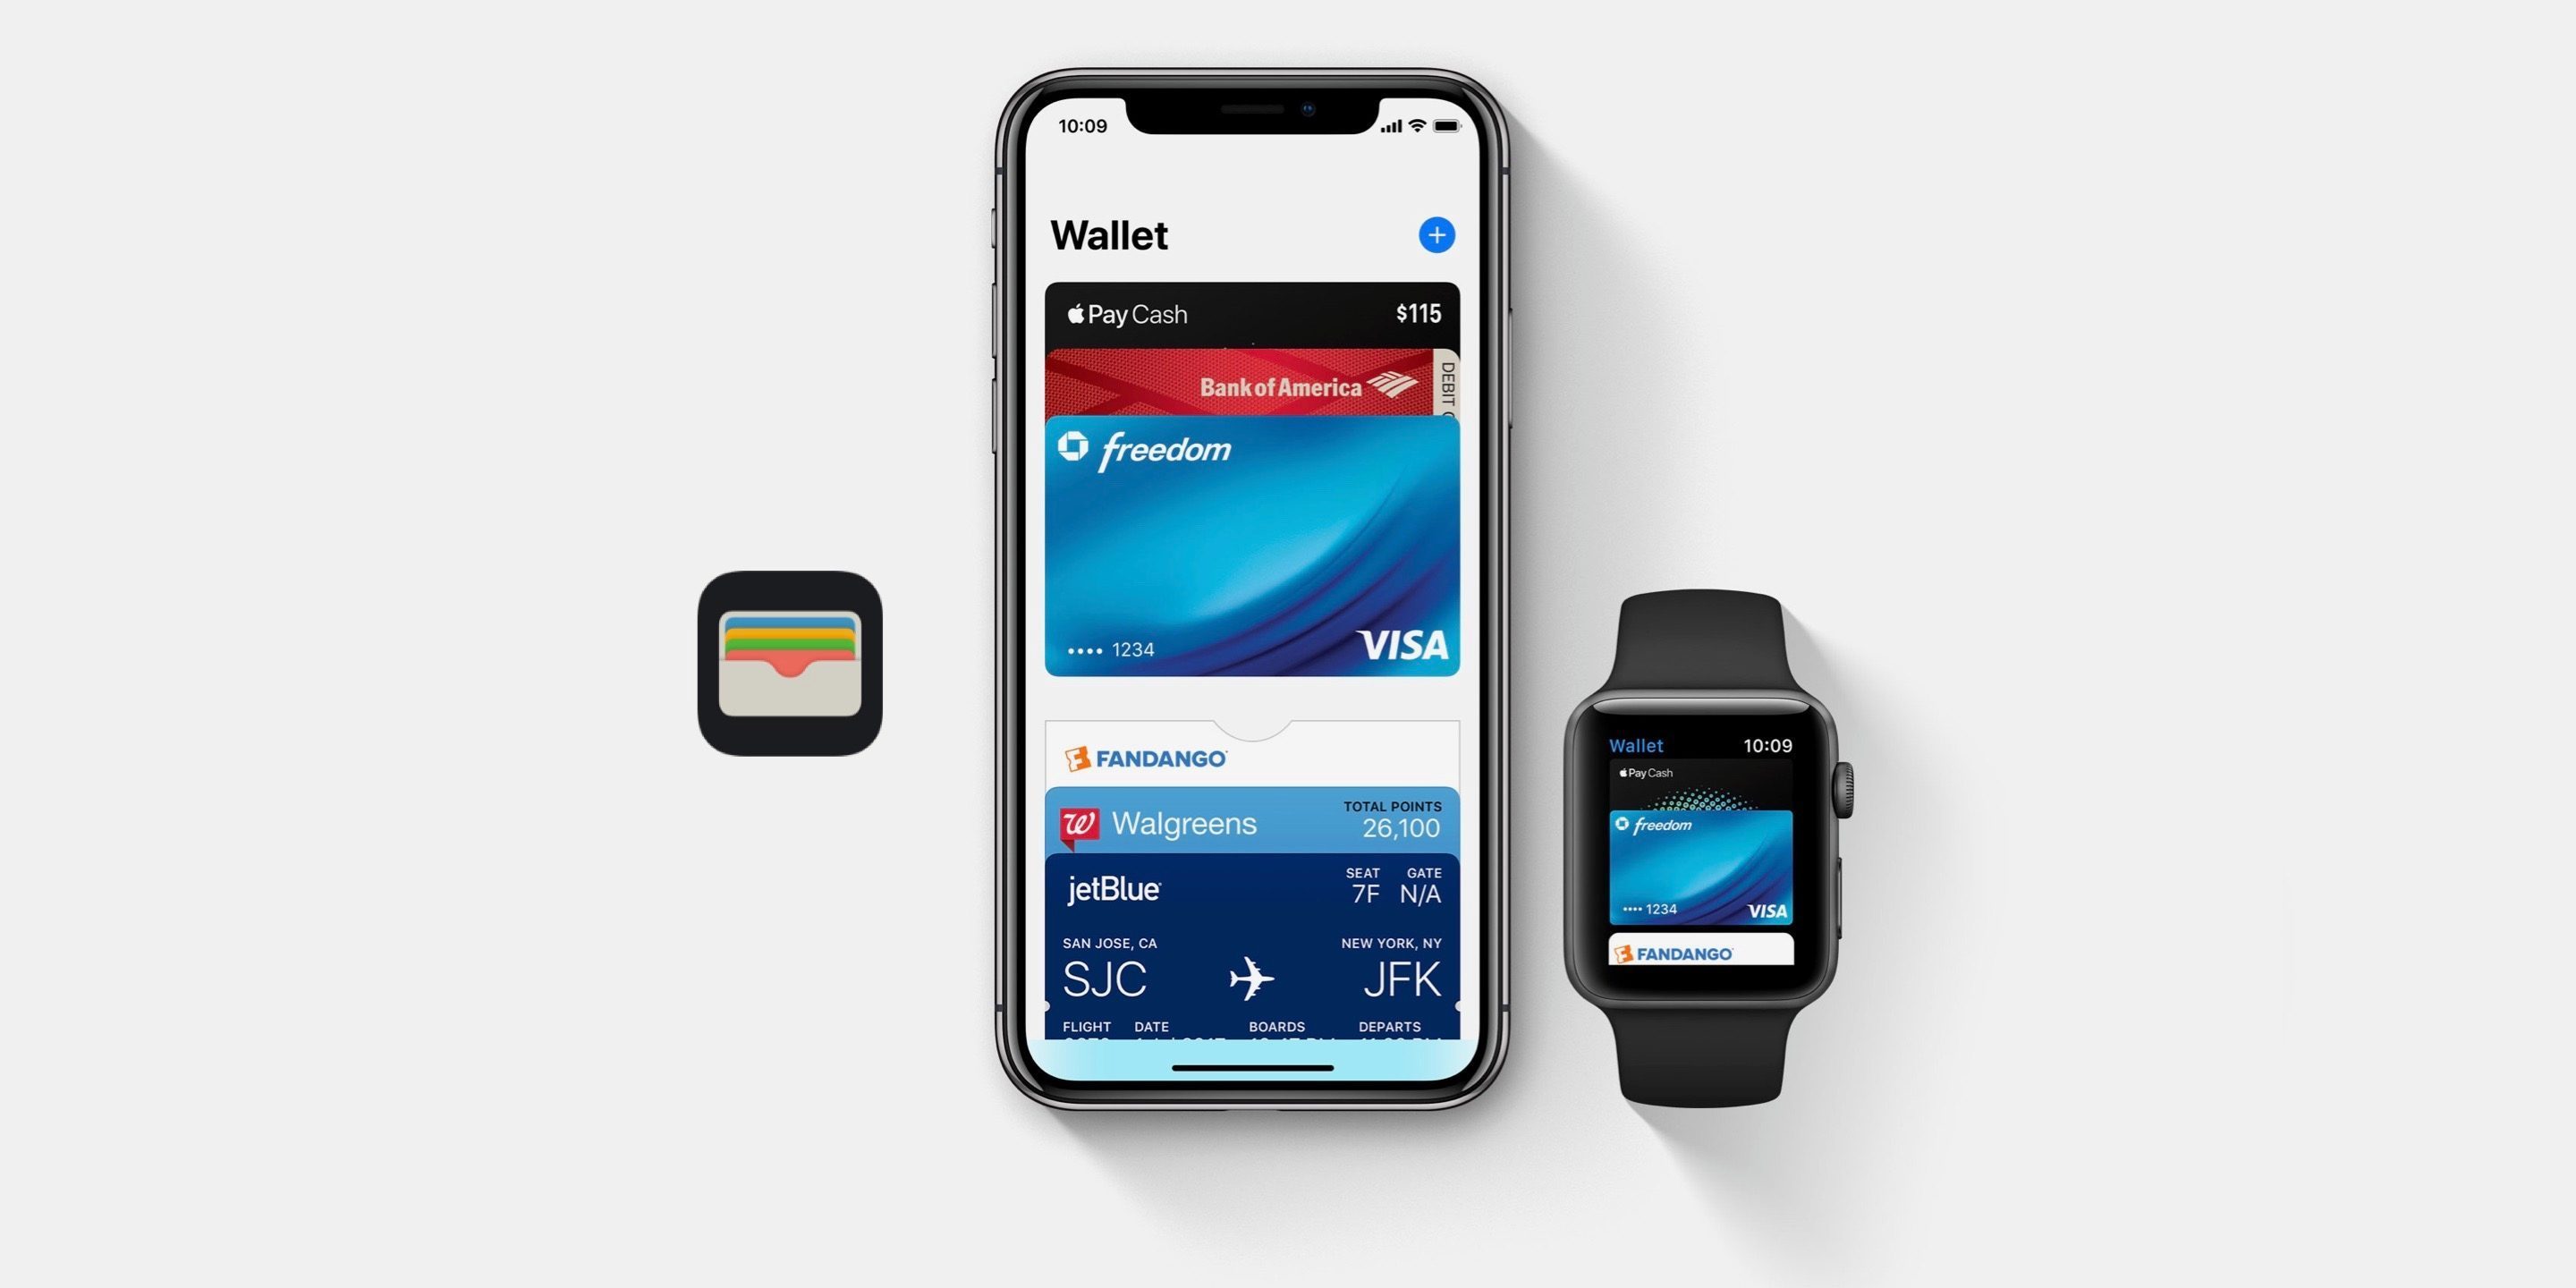 Apple Pay Support Now Rolling Out to Users in the Netherlands